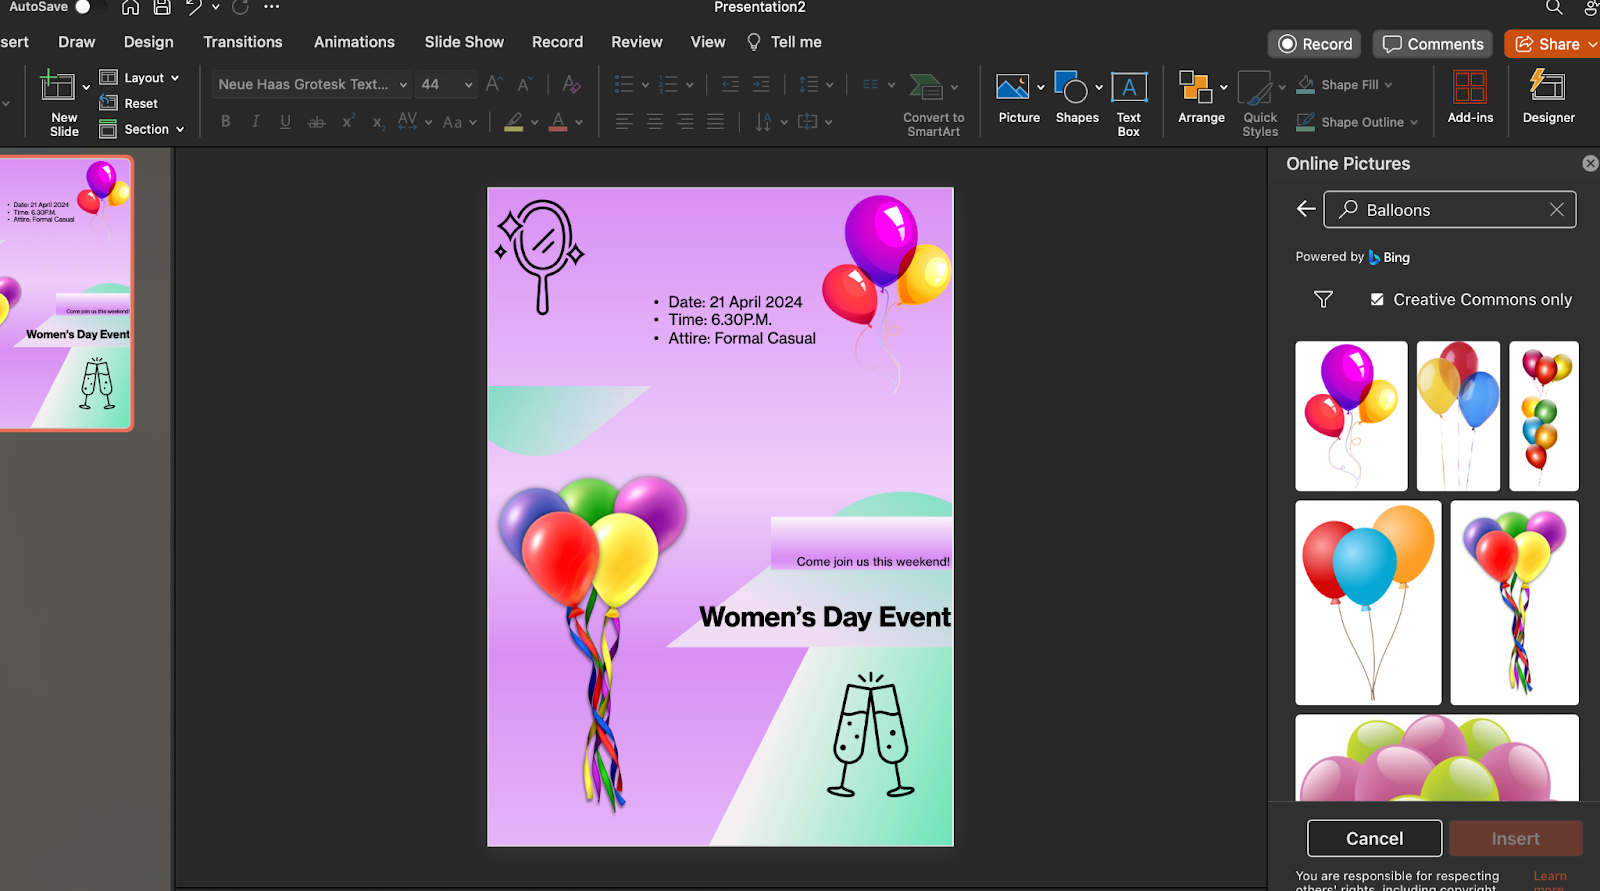 Poster with balloons on powerpoint slide